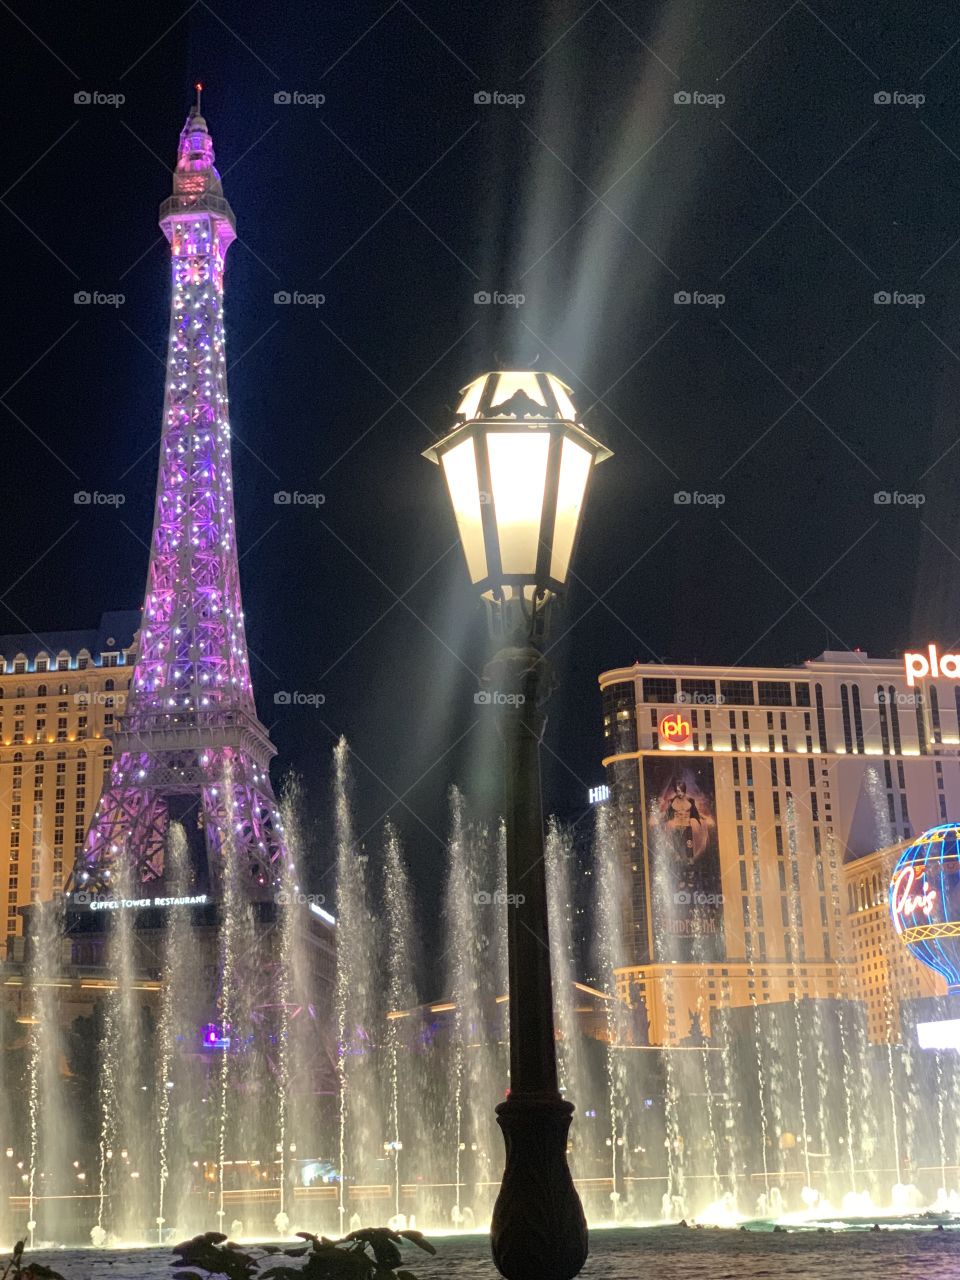 A view from Prime Steakhouse of the Bellagio Fountains!